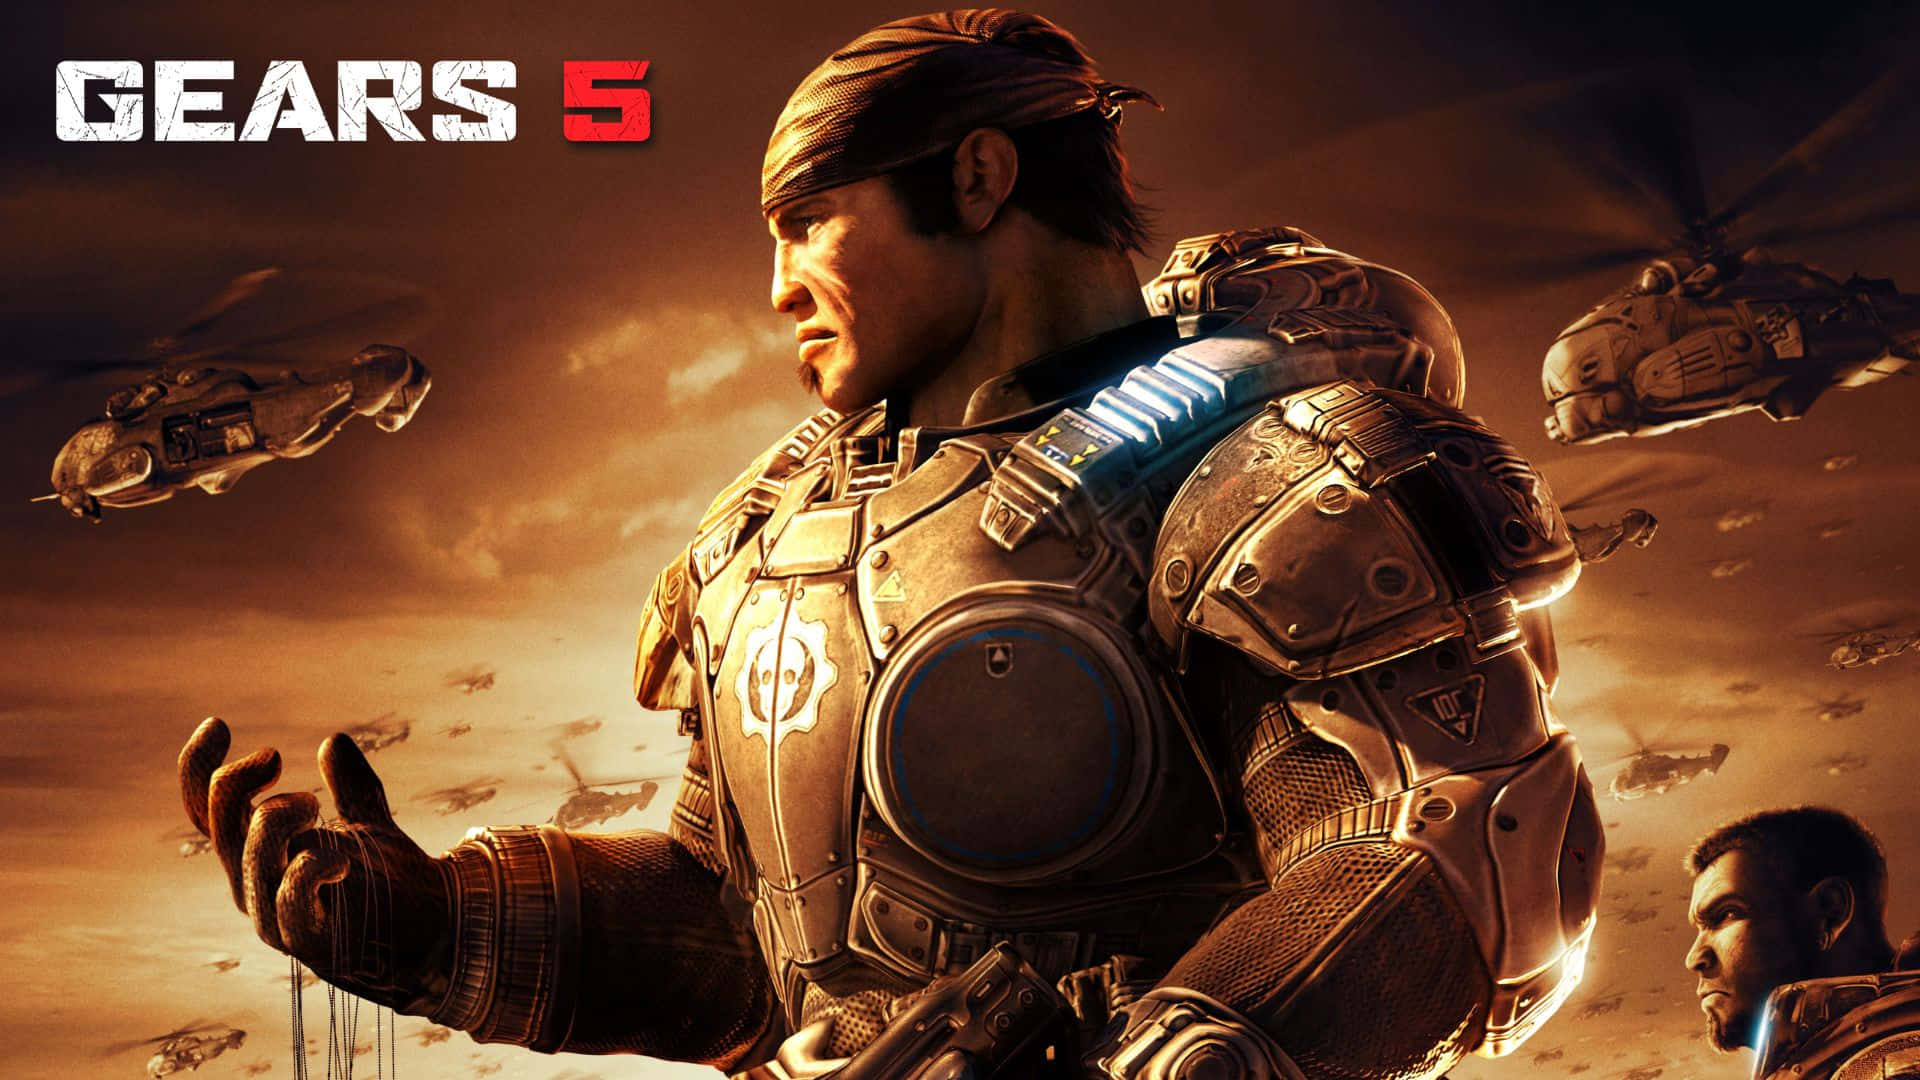 Get Ready for Action in Gears of War 5